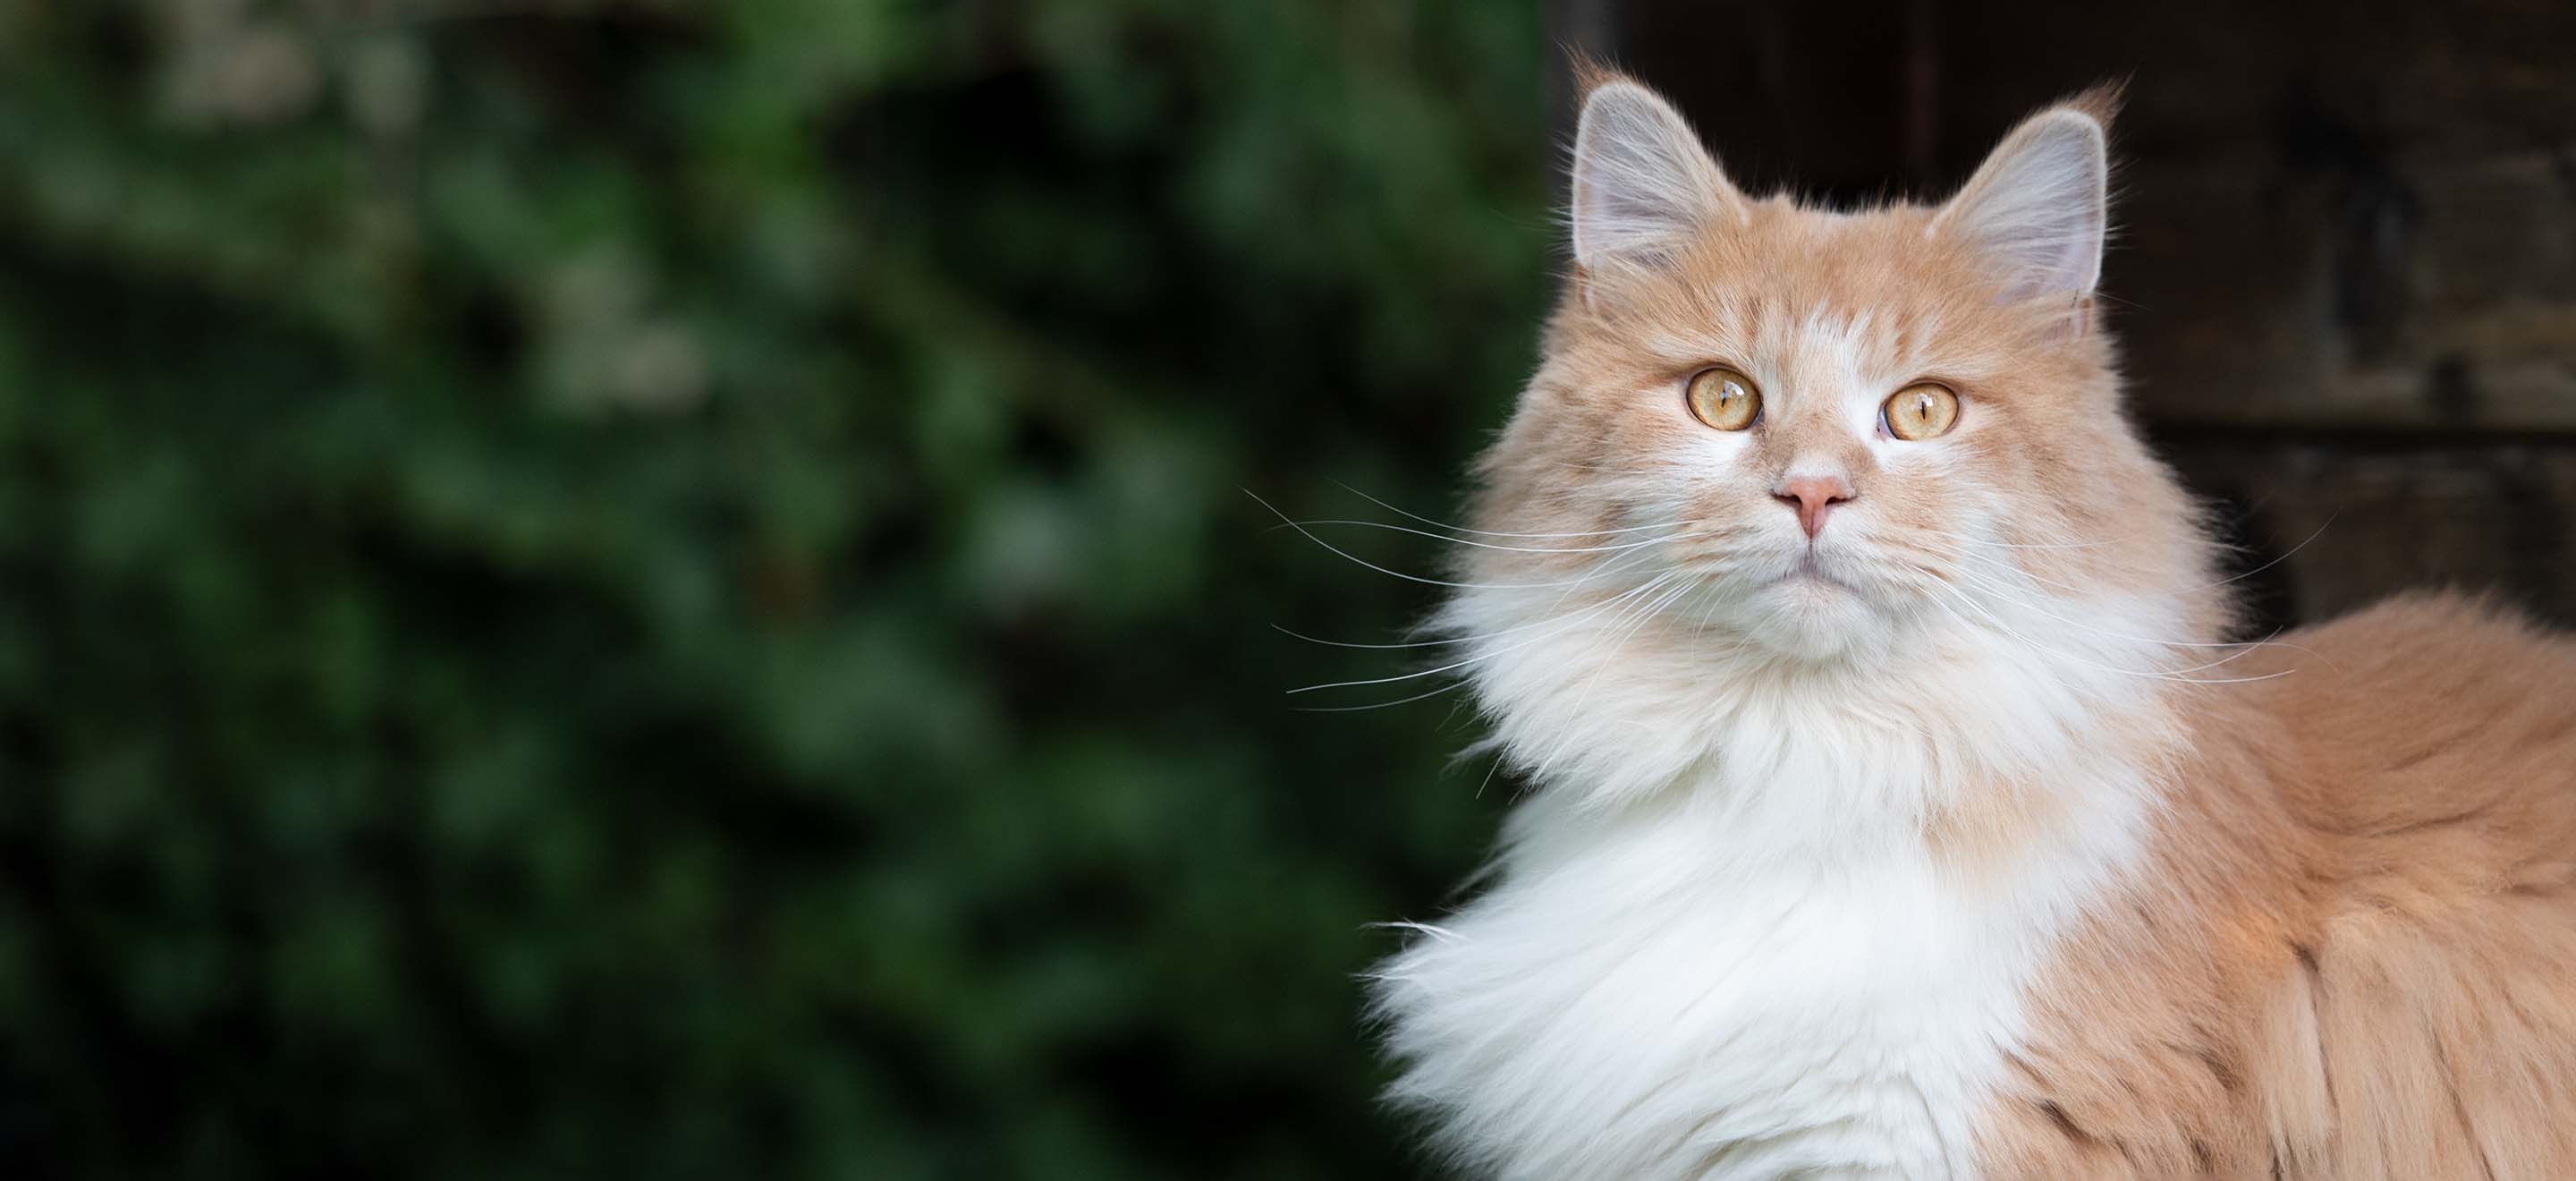 A Ragamuffin cat standing on the back porch with greenery in the background image